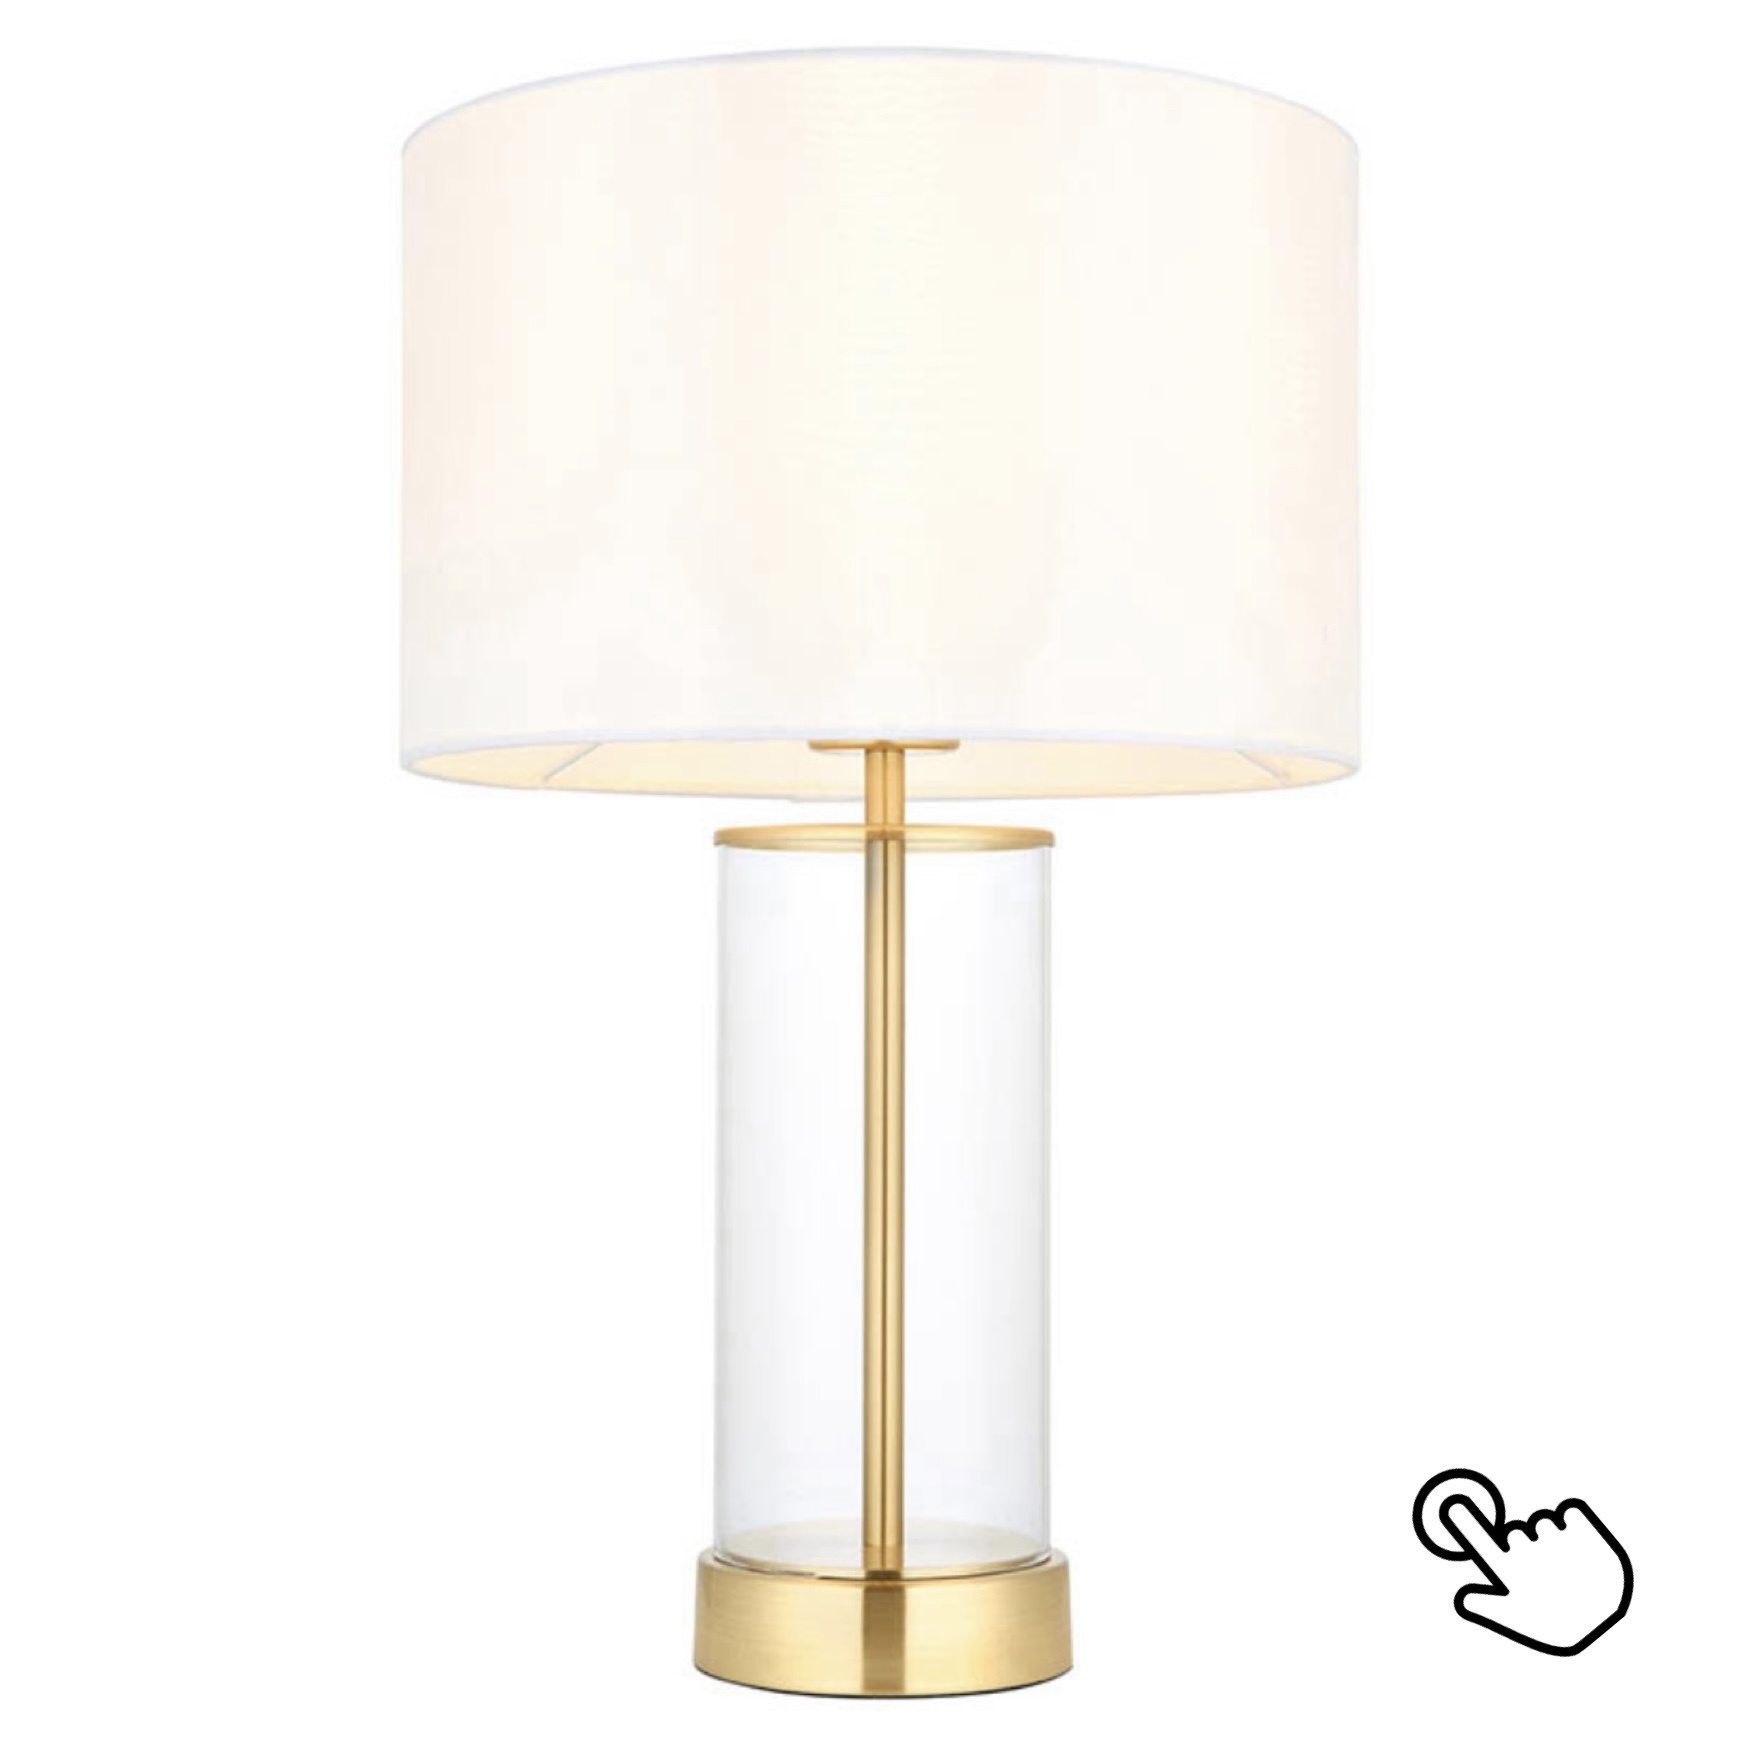 Sina - 3 Stage Touch Table Lamp - Brushed Brass and Vintage White Shad -  Lightbox